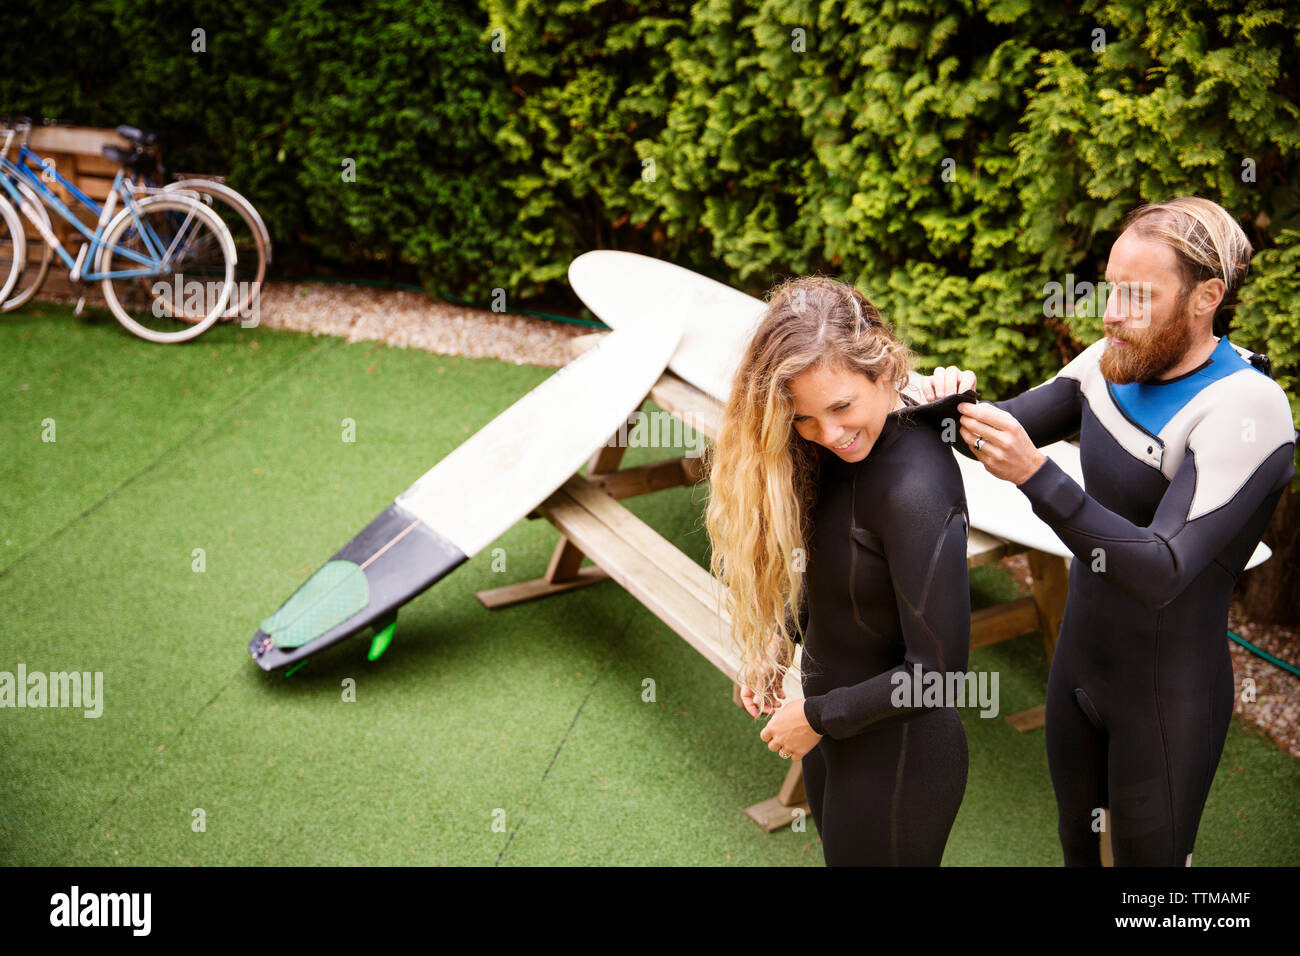 Man zipping up woman's wetsuit at lawn Stock Photo